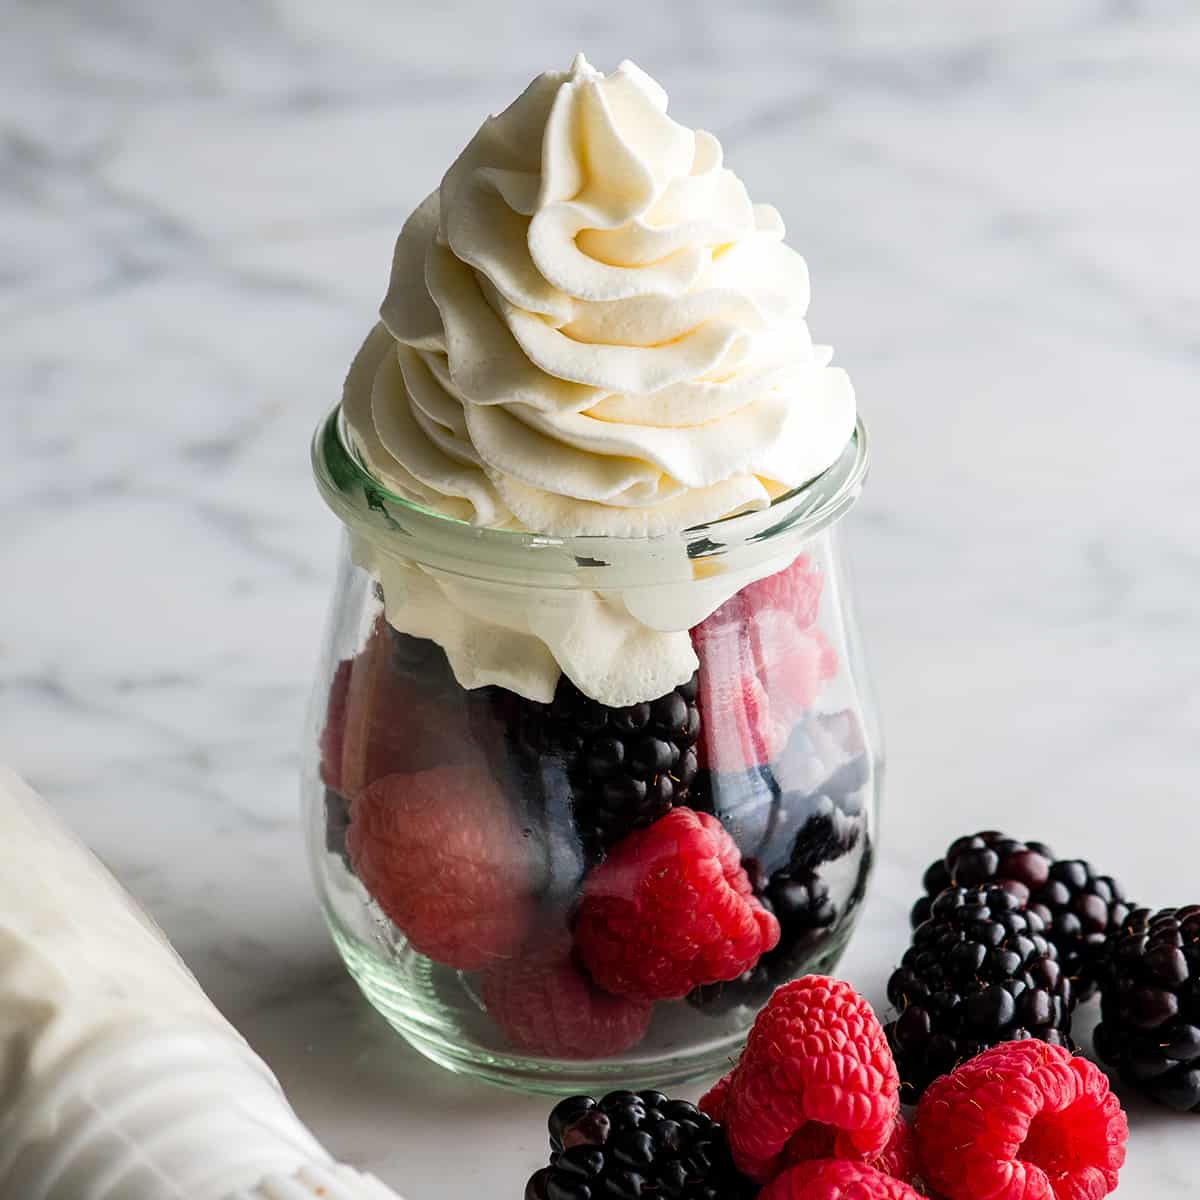  homemade whipped cream piped on top of fresh berries in a glass jar